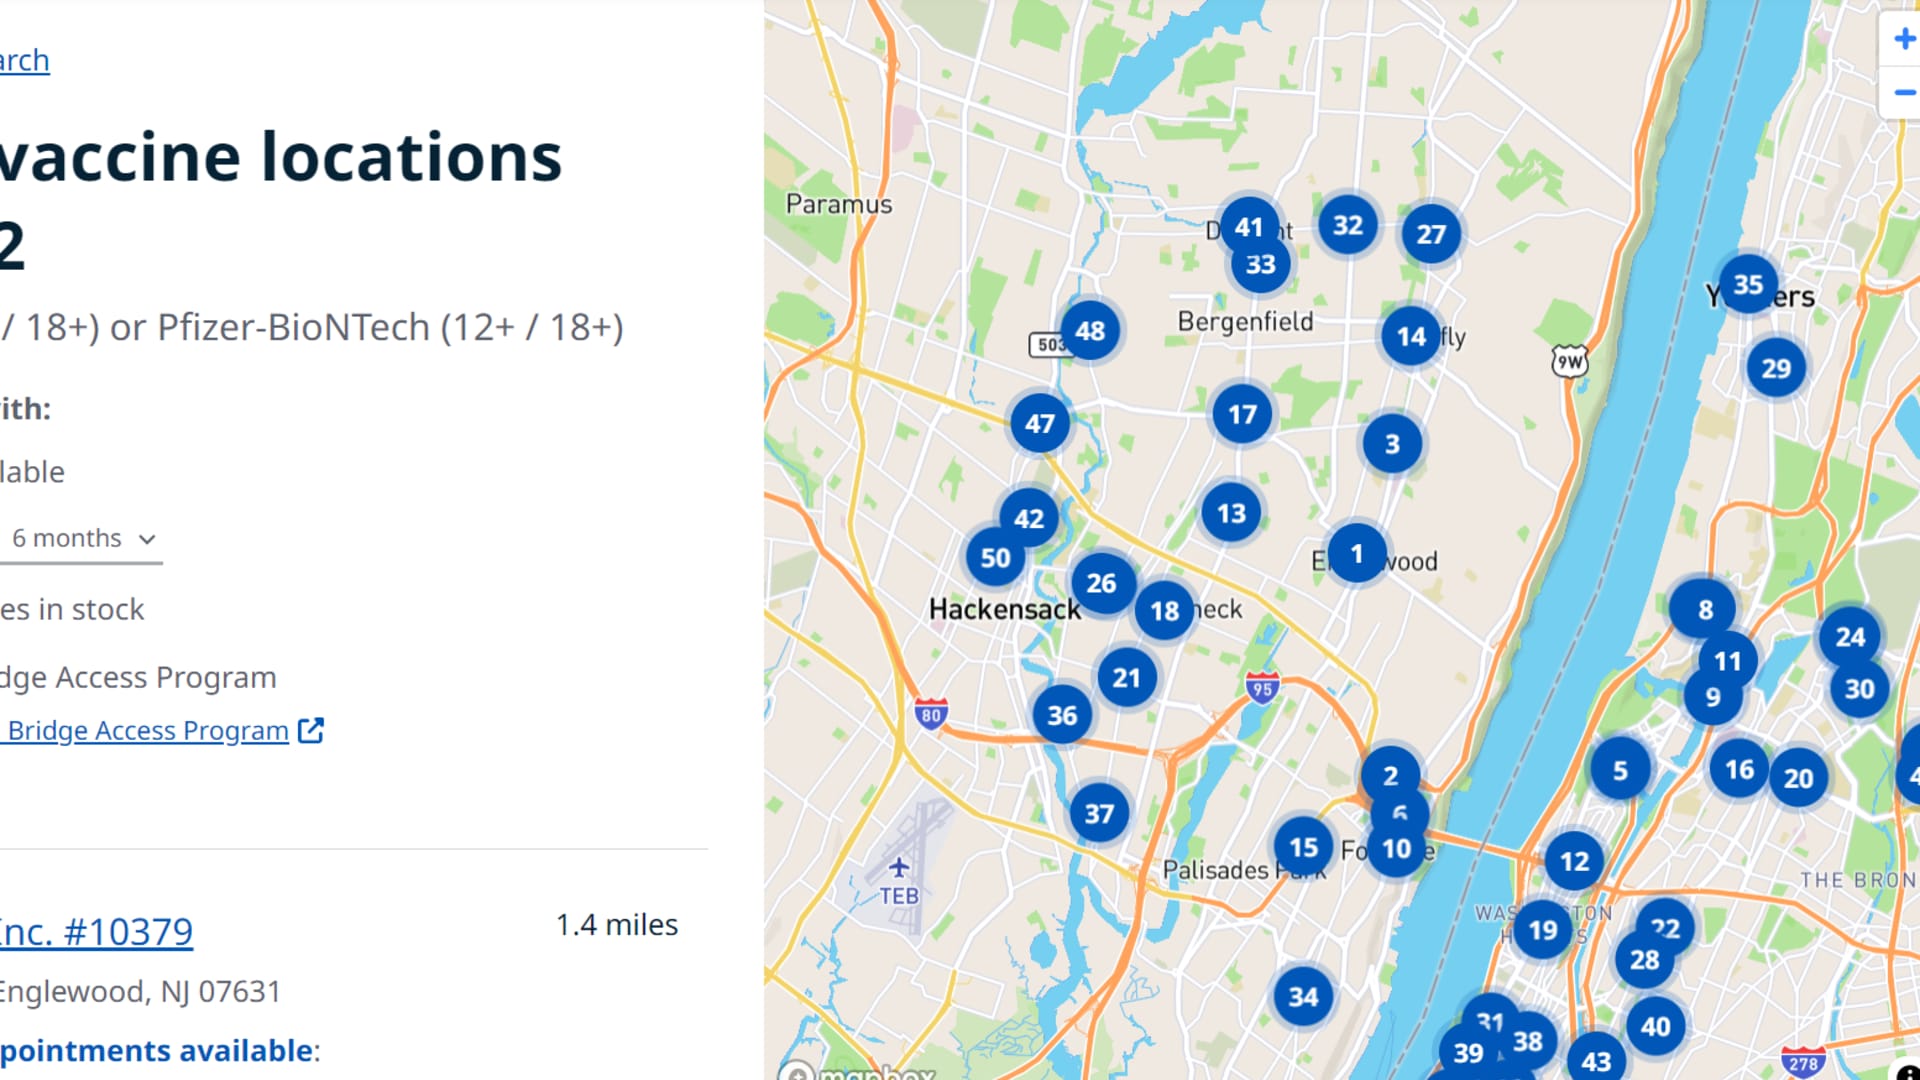 Vaccines.gov search tool displaying pharmacies and other locations offering free vaccines to uninsured Americans through the Biden administration's Bridge Access Program.